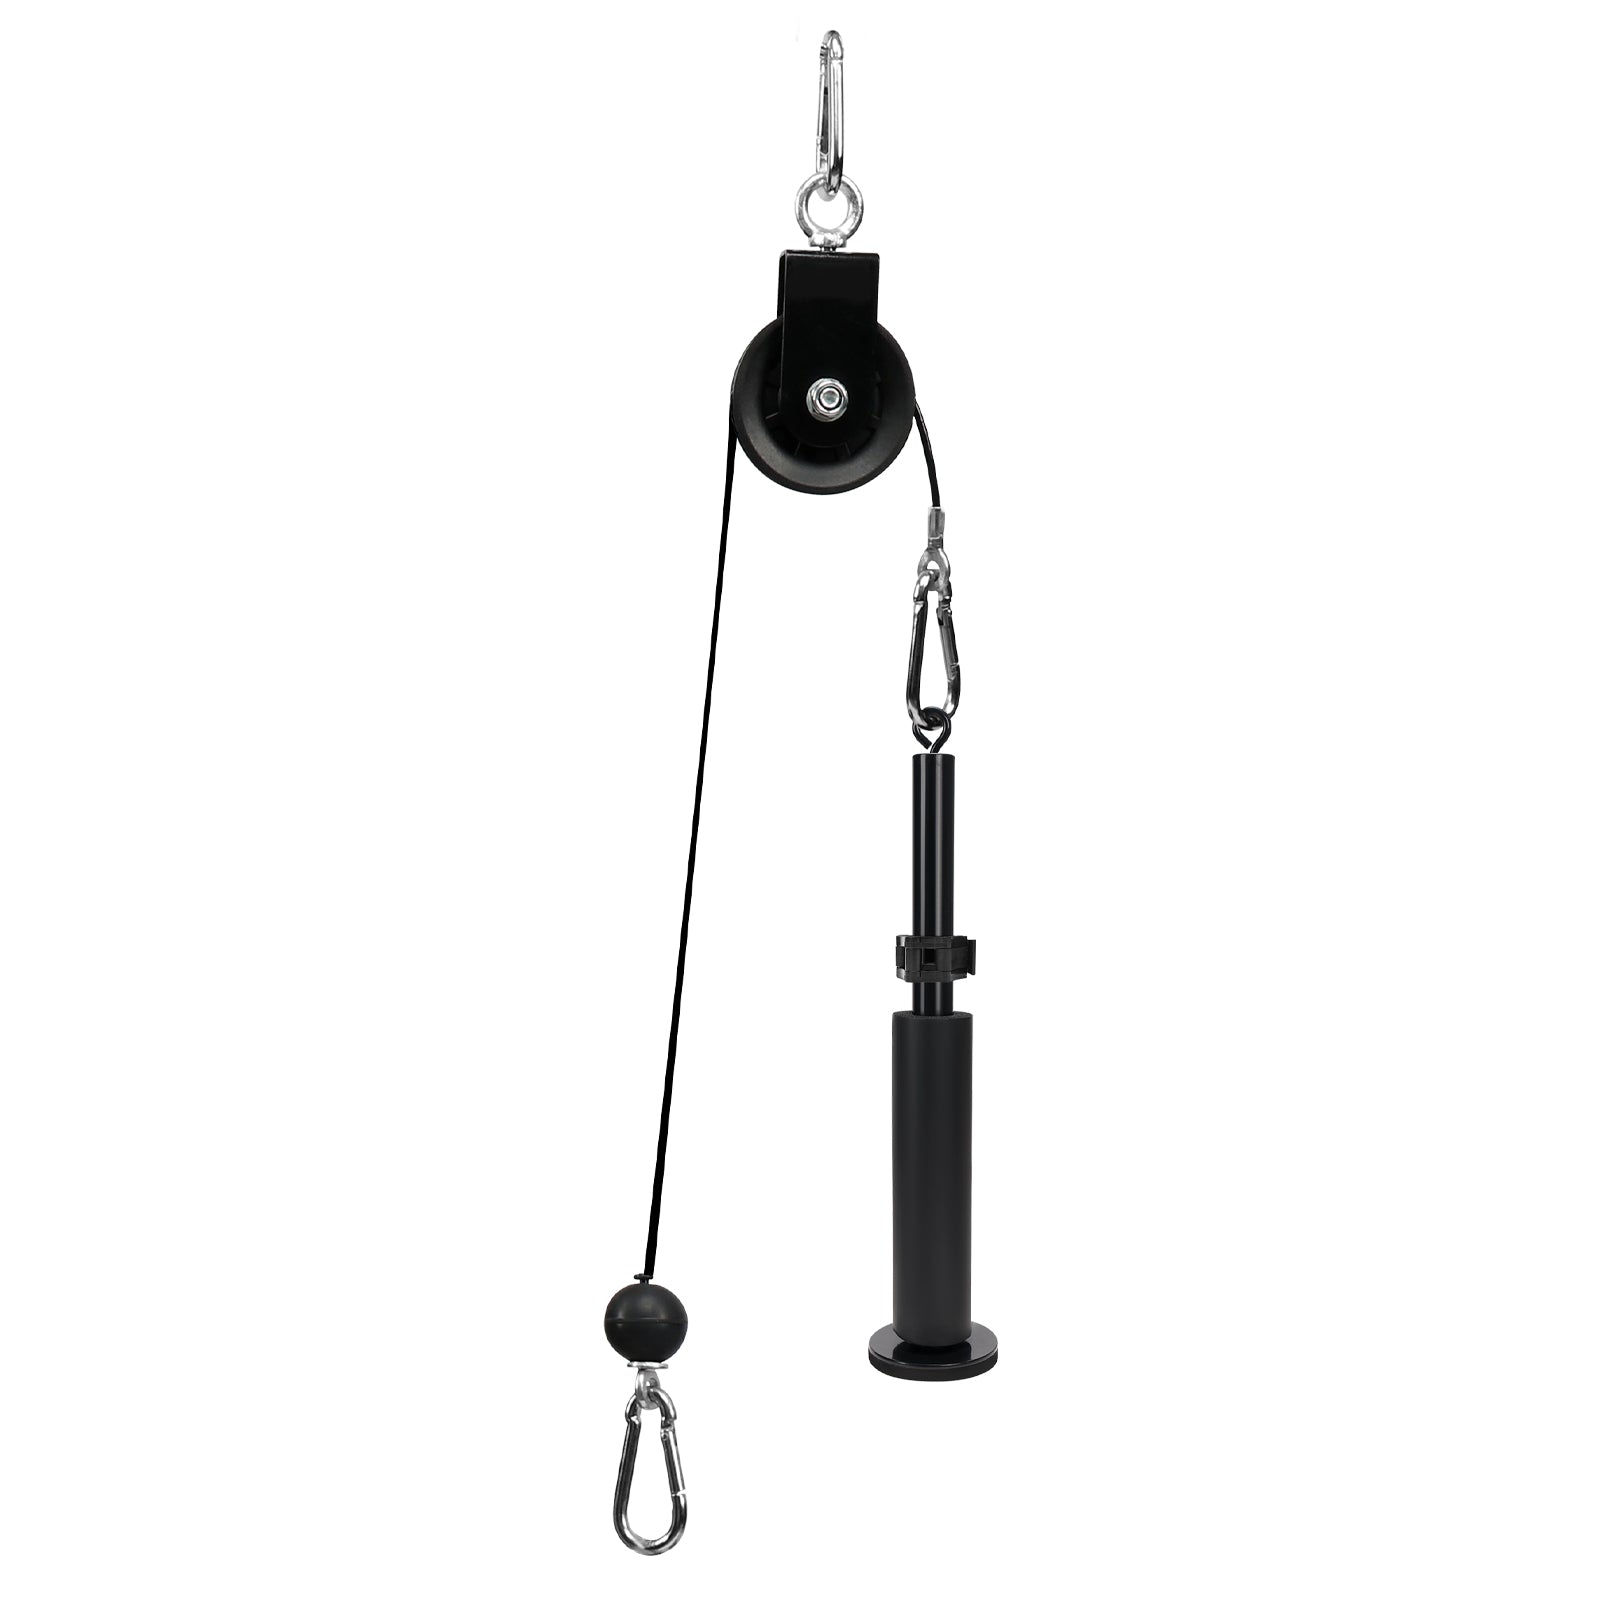 Mikolo Pulley System 2 0